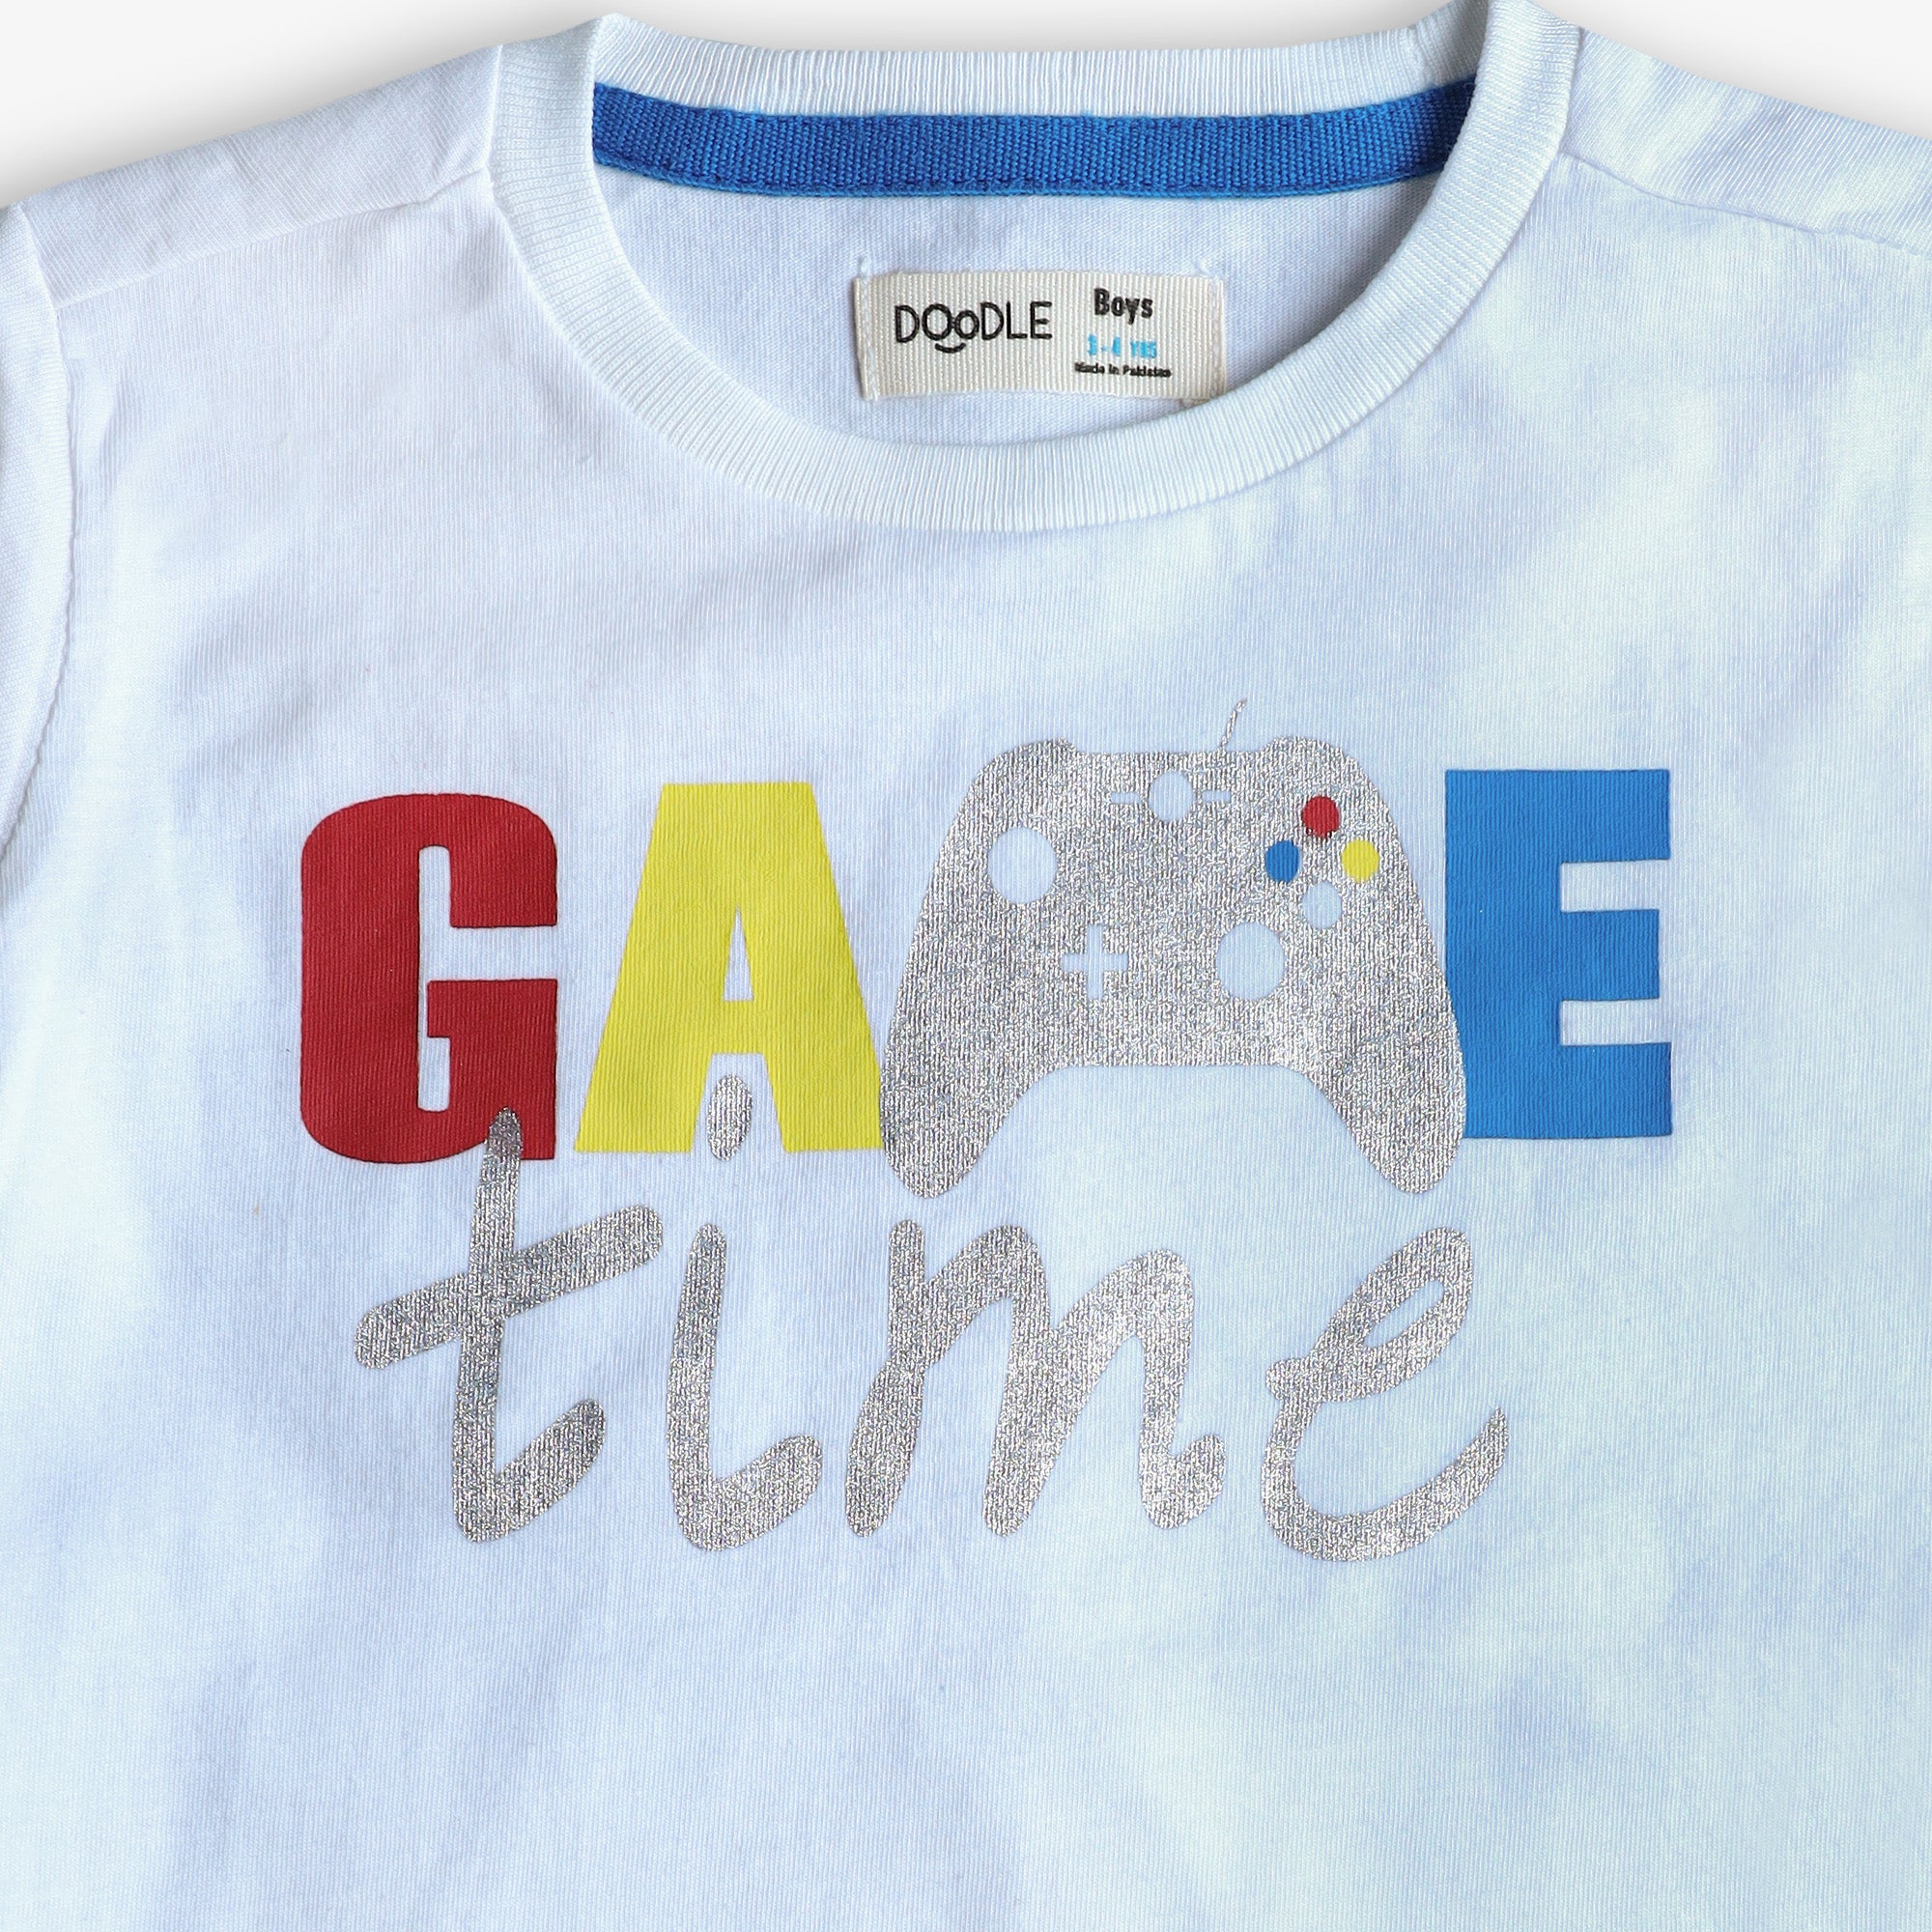 GAME TIME GRAPHIC TEE-KBKT-164